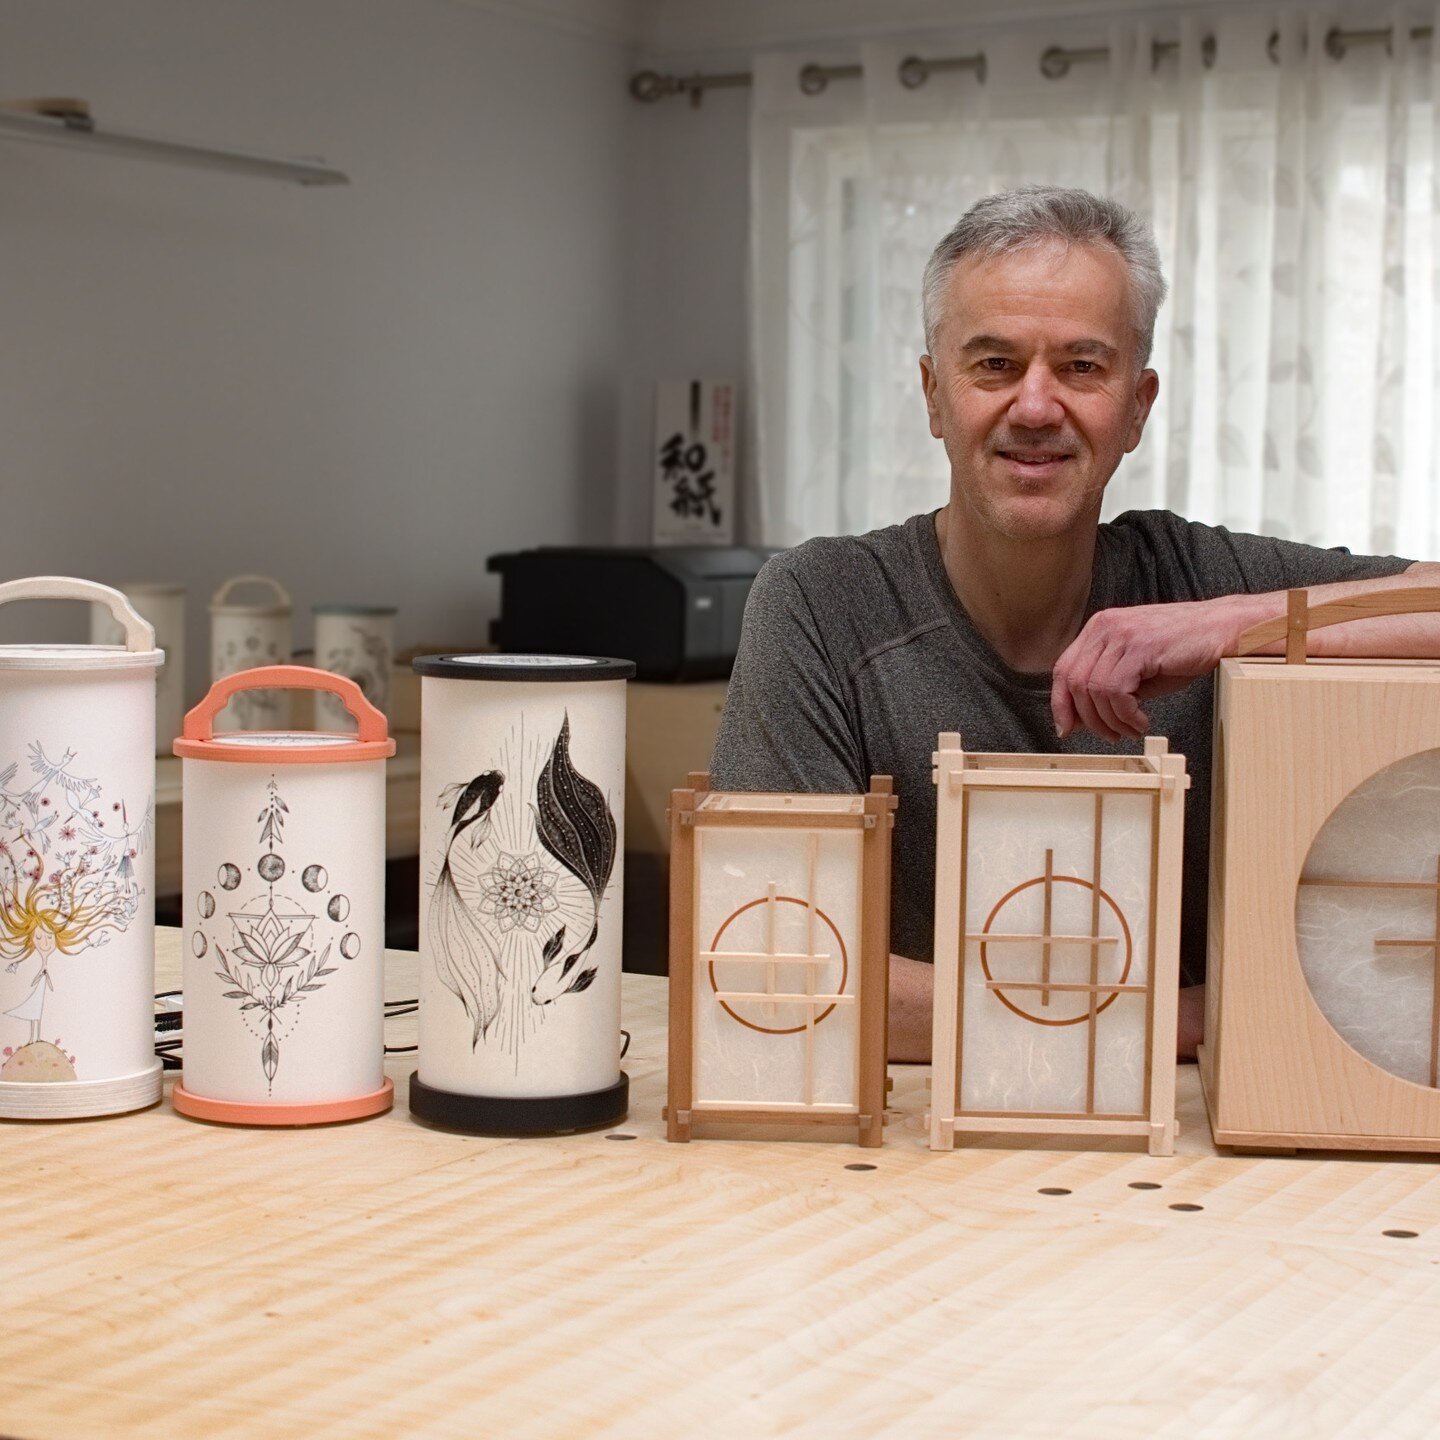 Showing some of my lanterns and lamps, with a rare picture of me. 

I'm busy with several other new designs, including a small candle sleeve version.

The smaller candle sleeve version will offer something that is still very special, but at a lower c